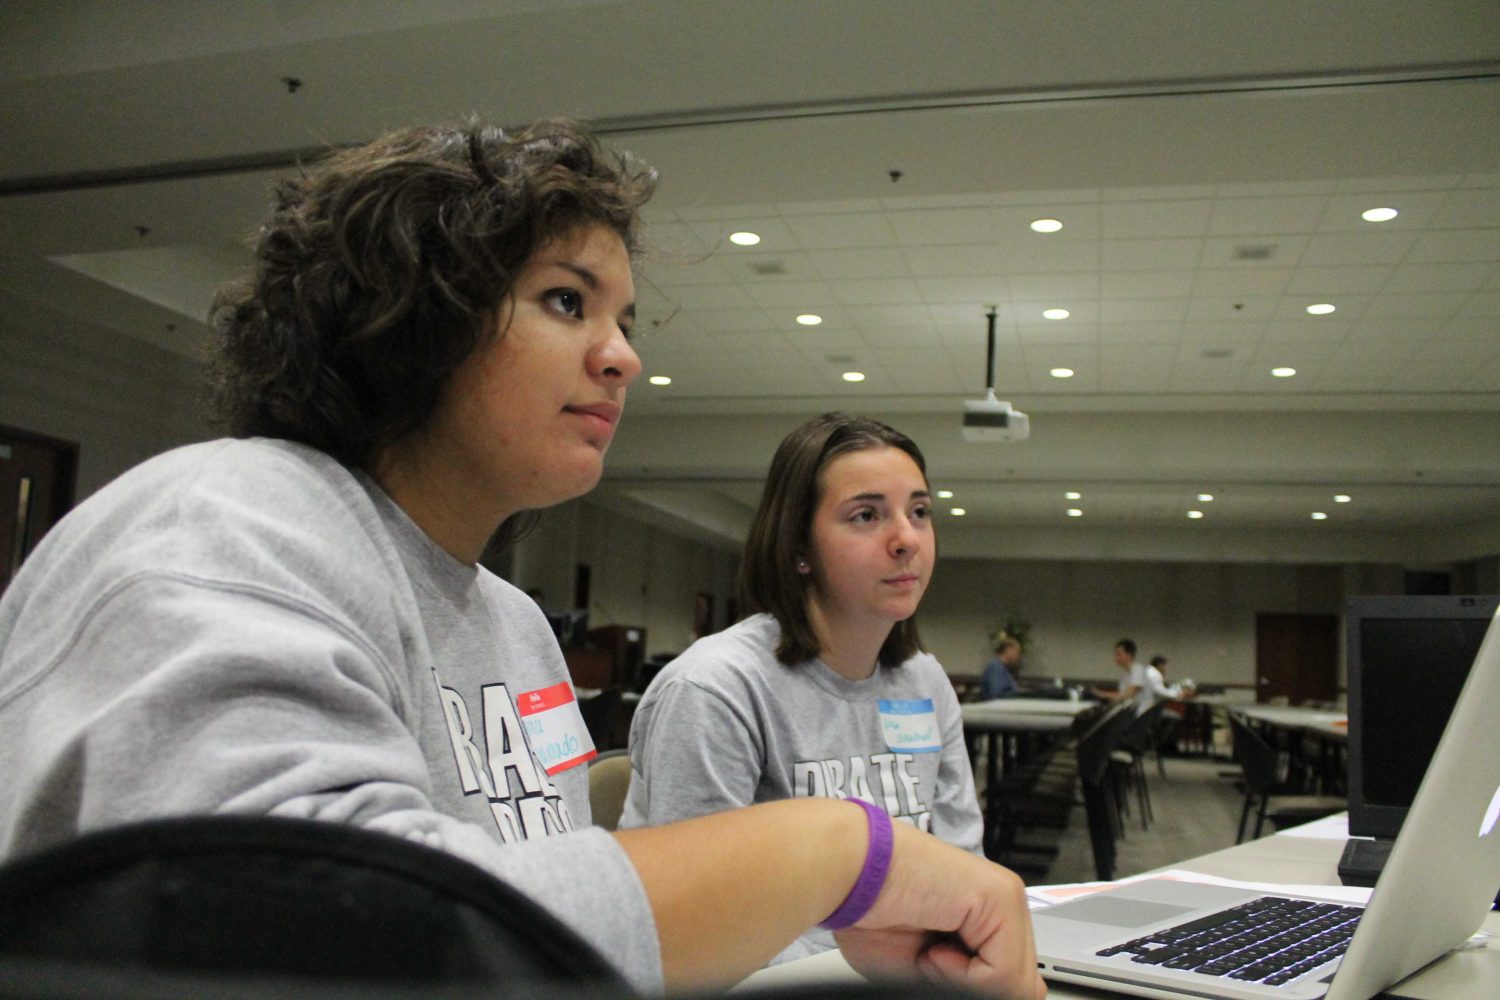 Students learn journalism skills from pros